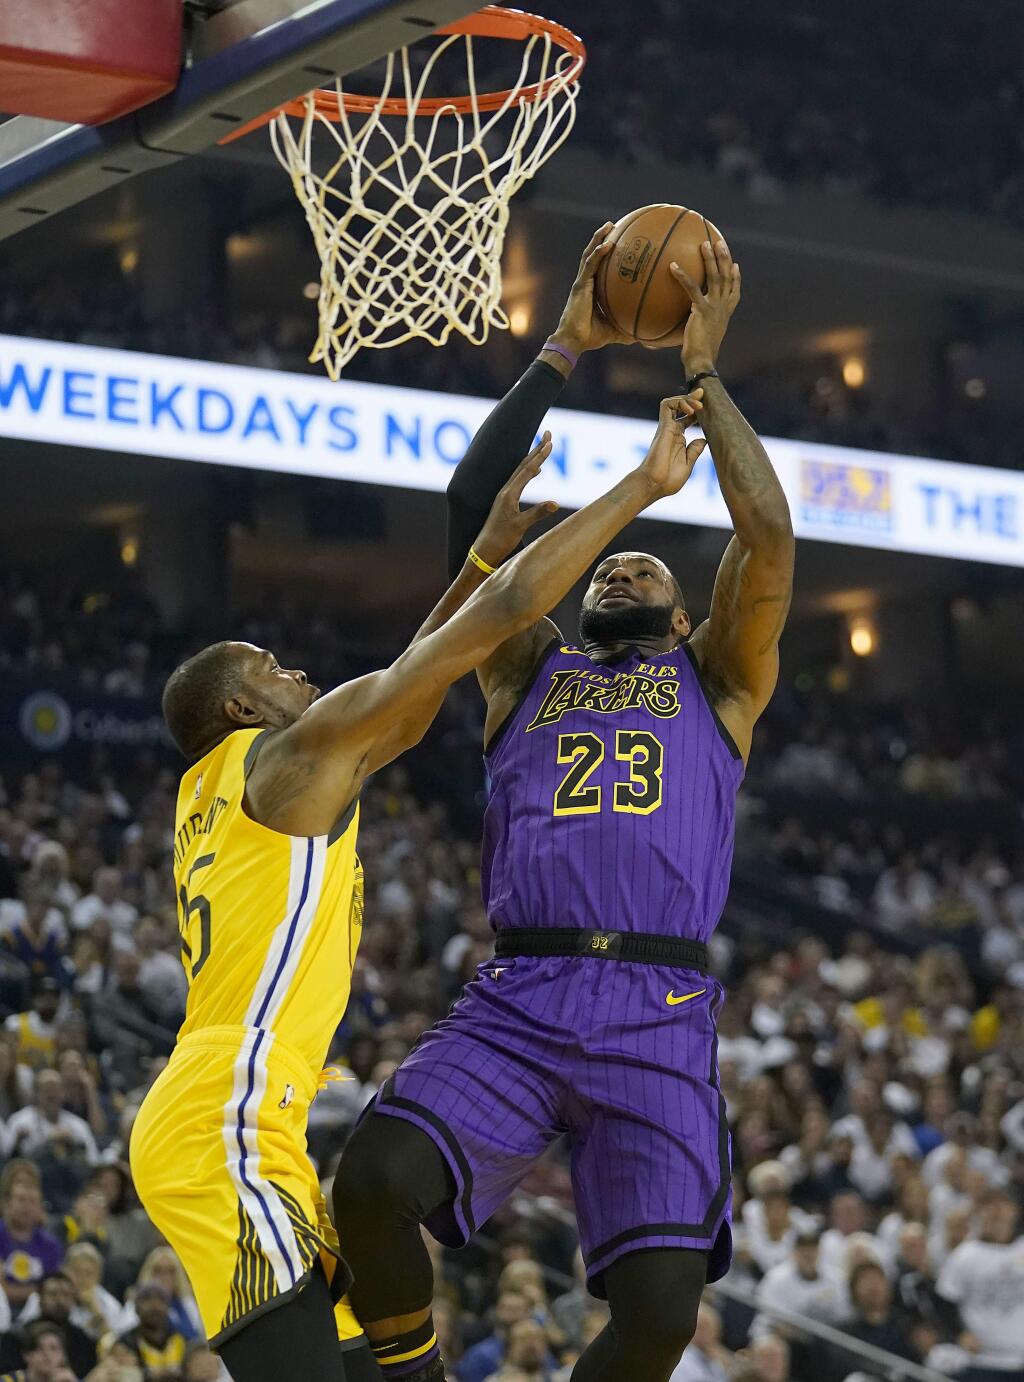 Los Angeles Lakers forward LeBron James (23) shoots over Golden State Warriors forward Kevin Durant (35) during the first half Tuesday, Dec. 25, 2018, in Oakland. (AP Photo/Tony Avelar)